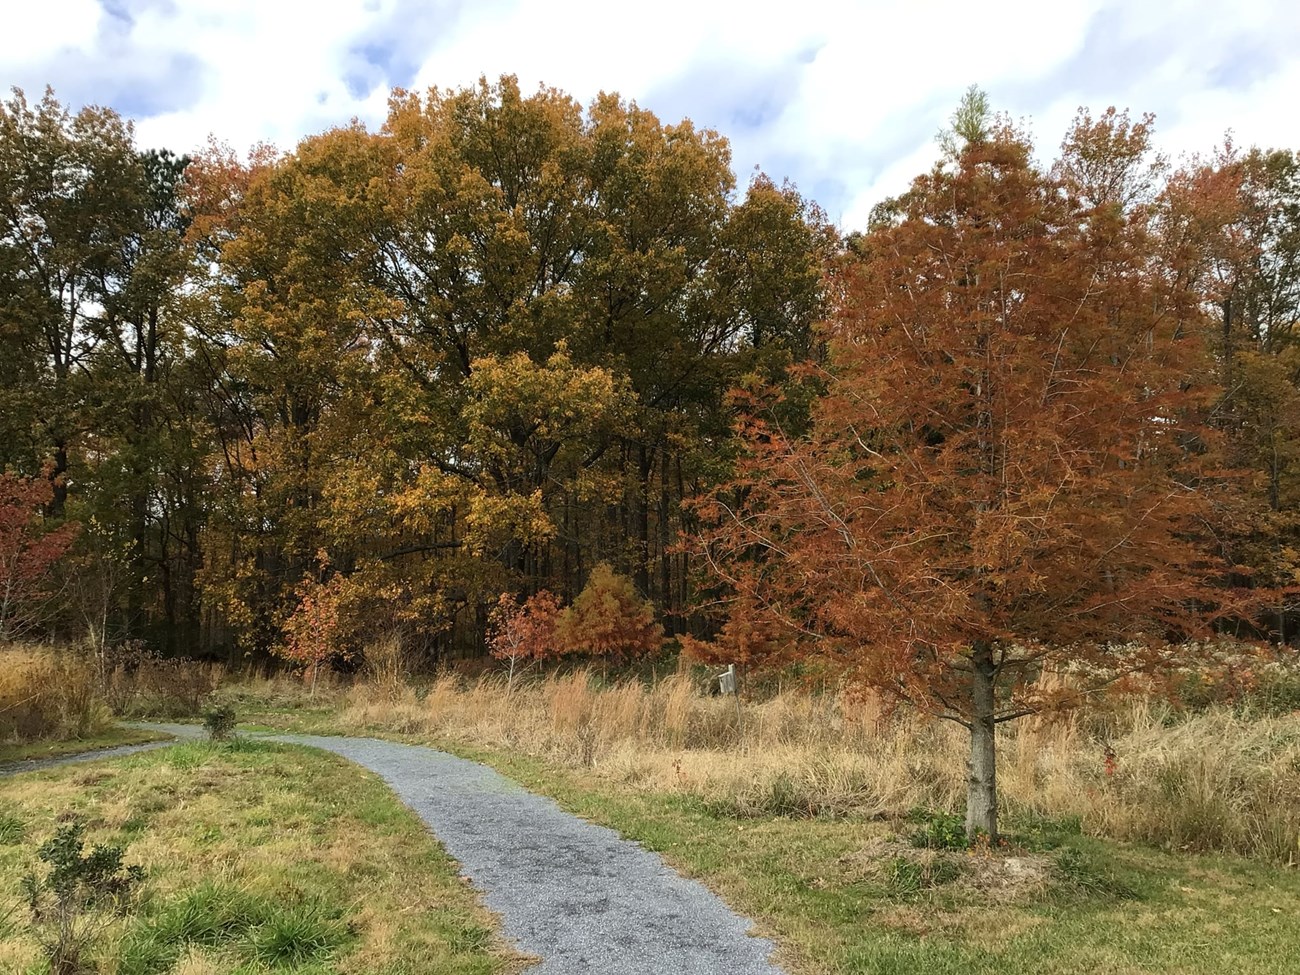 A walking path with a line of colorful autumnal trees on the right side.